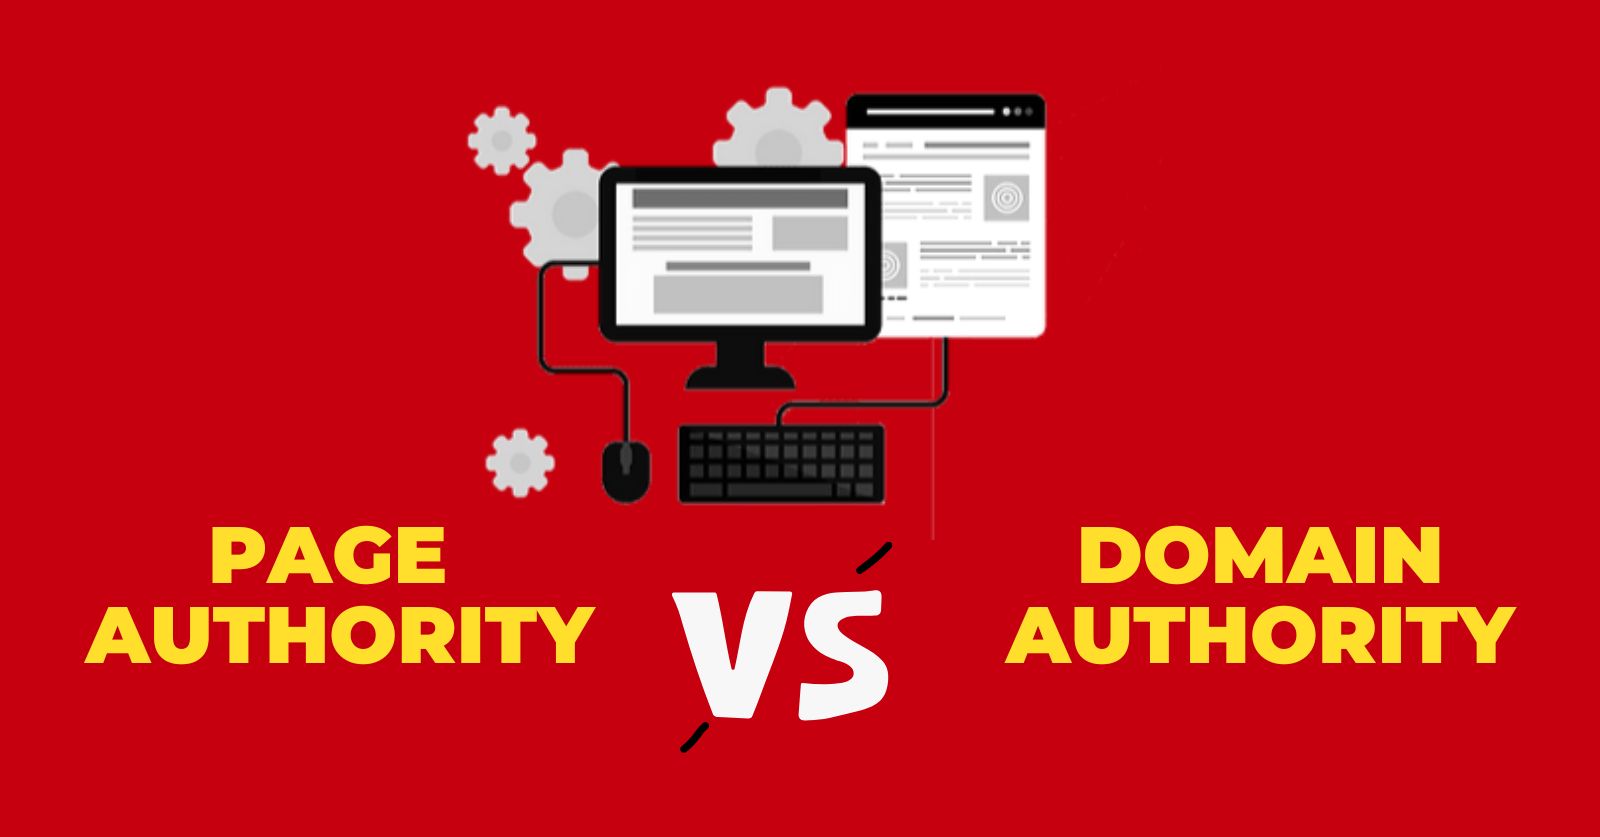 What’s More Important: Page Authority VS Domain Authority?